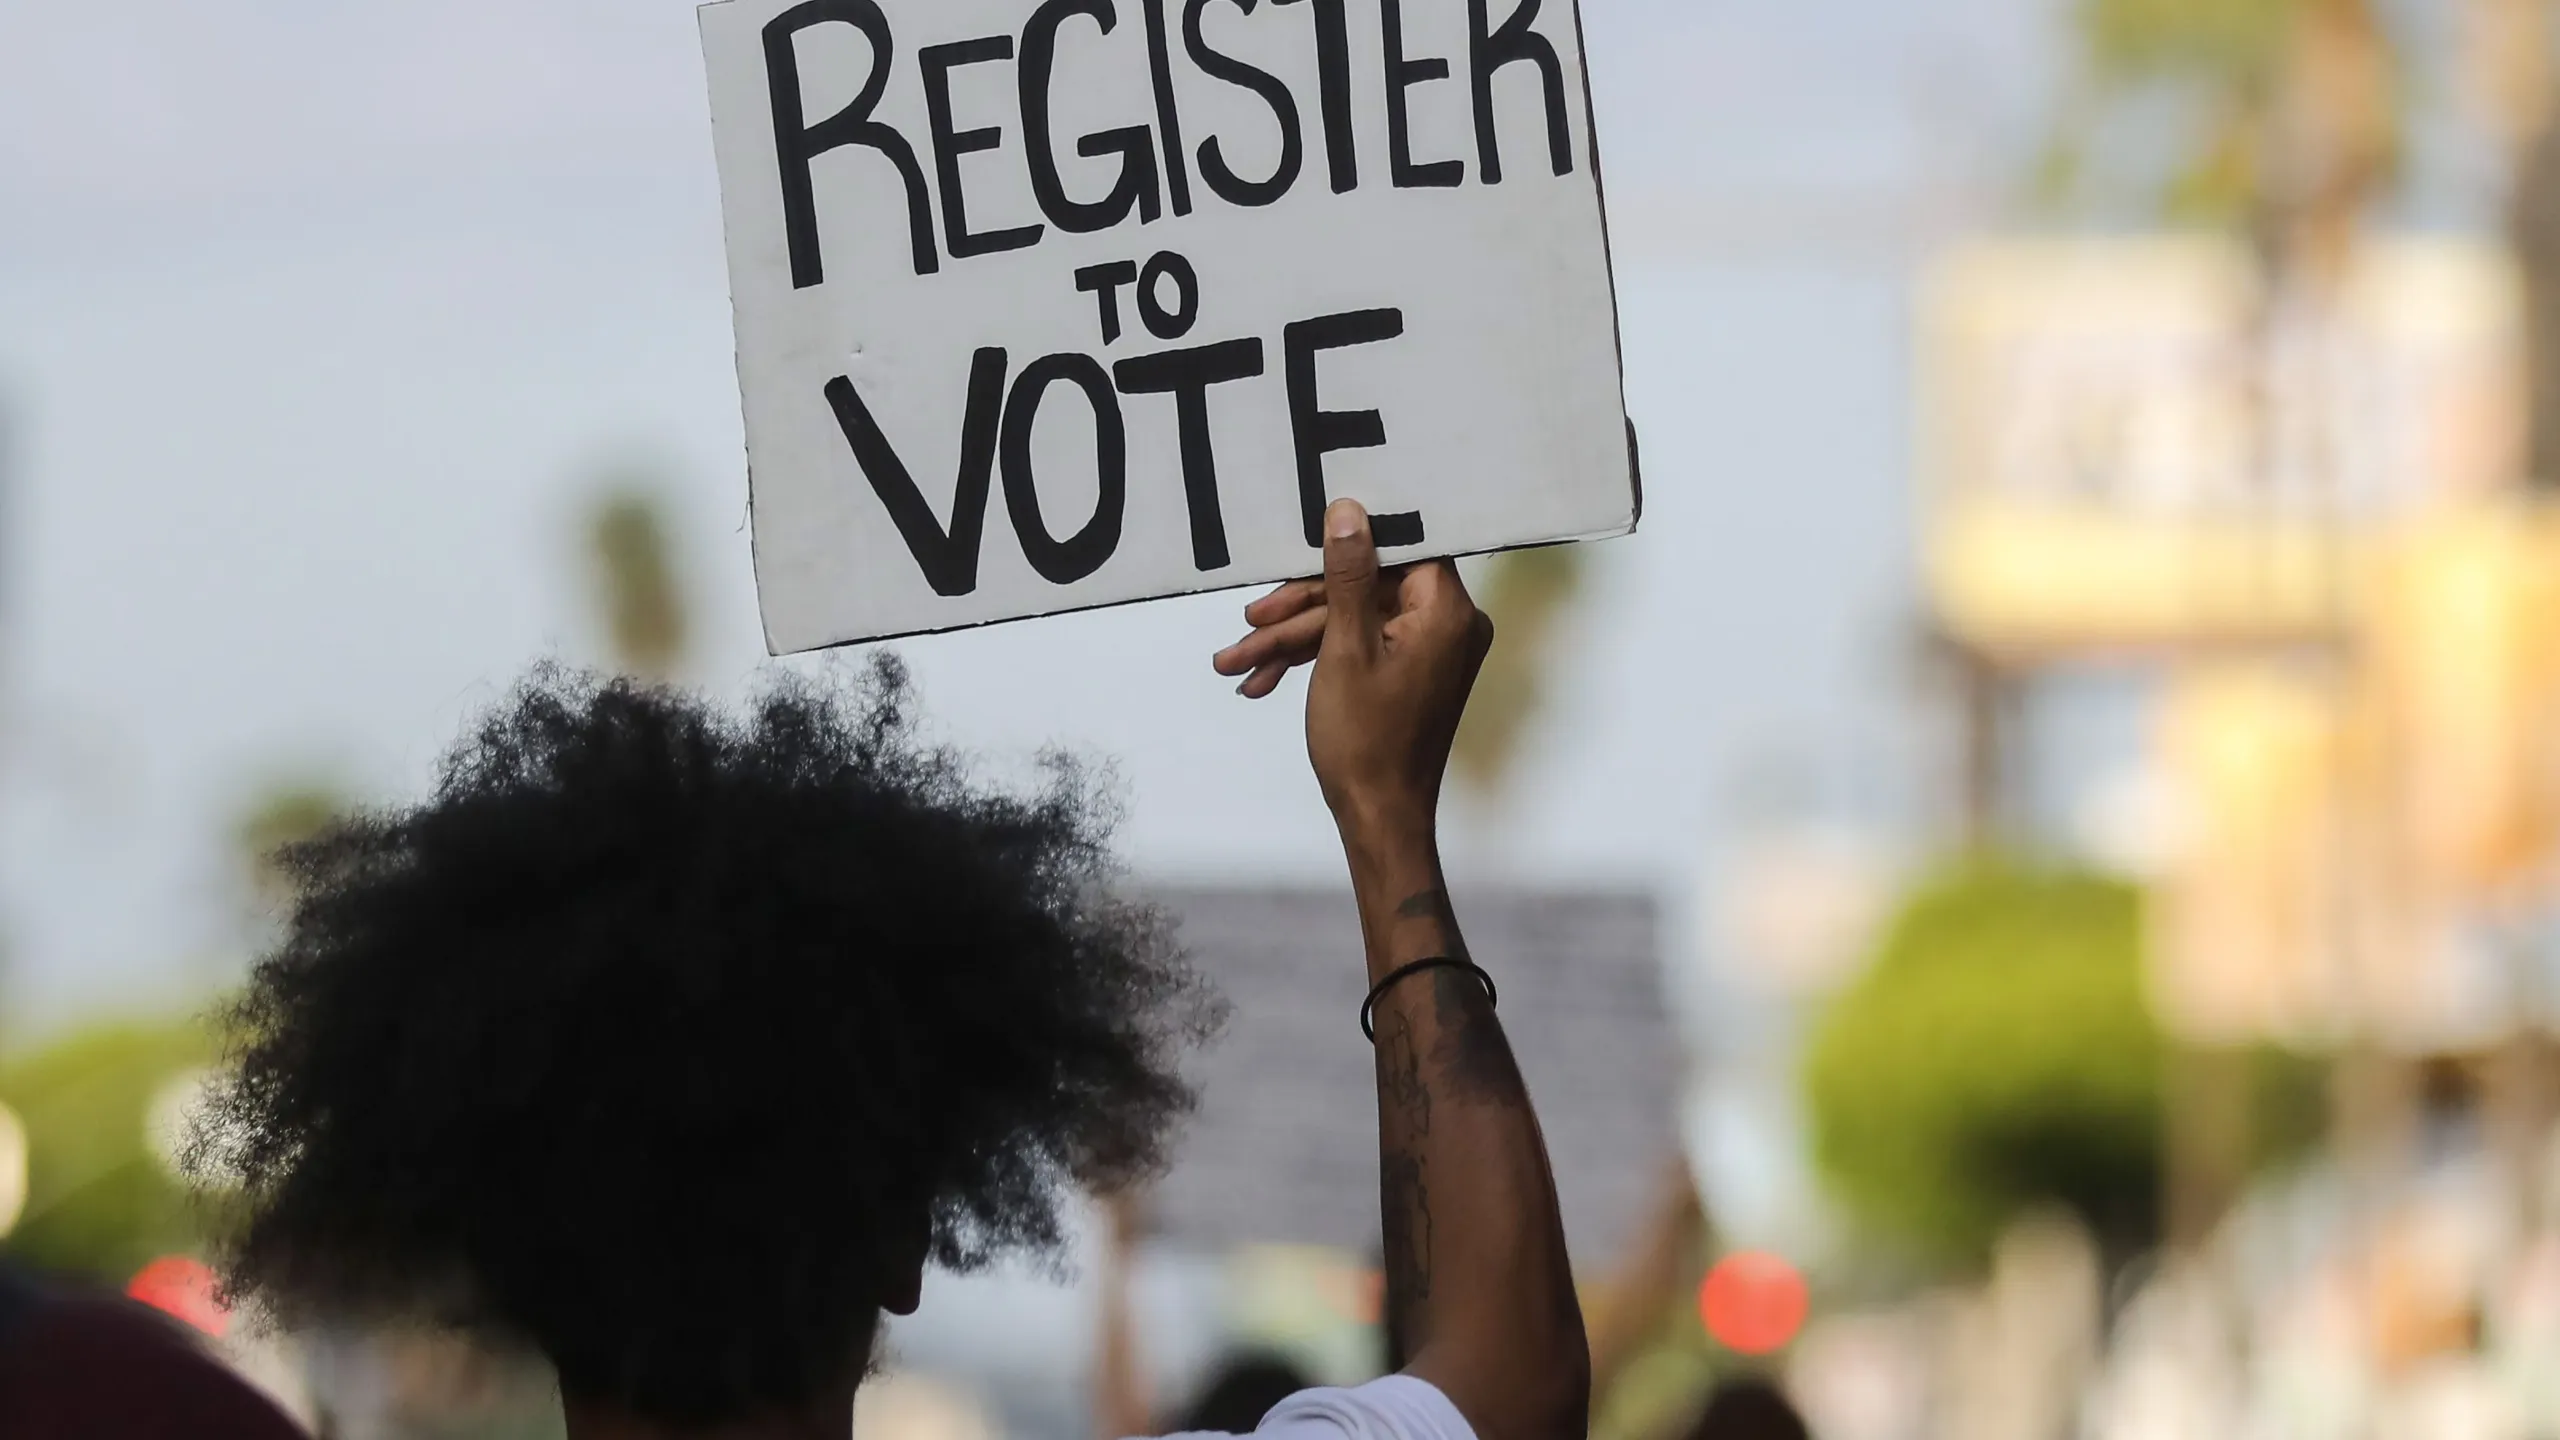 How to register to vote